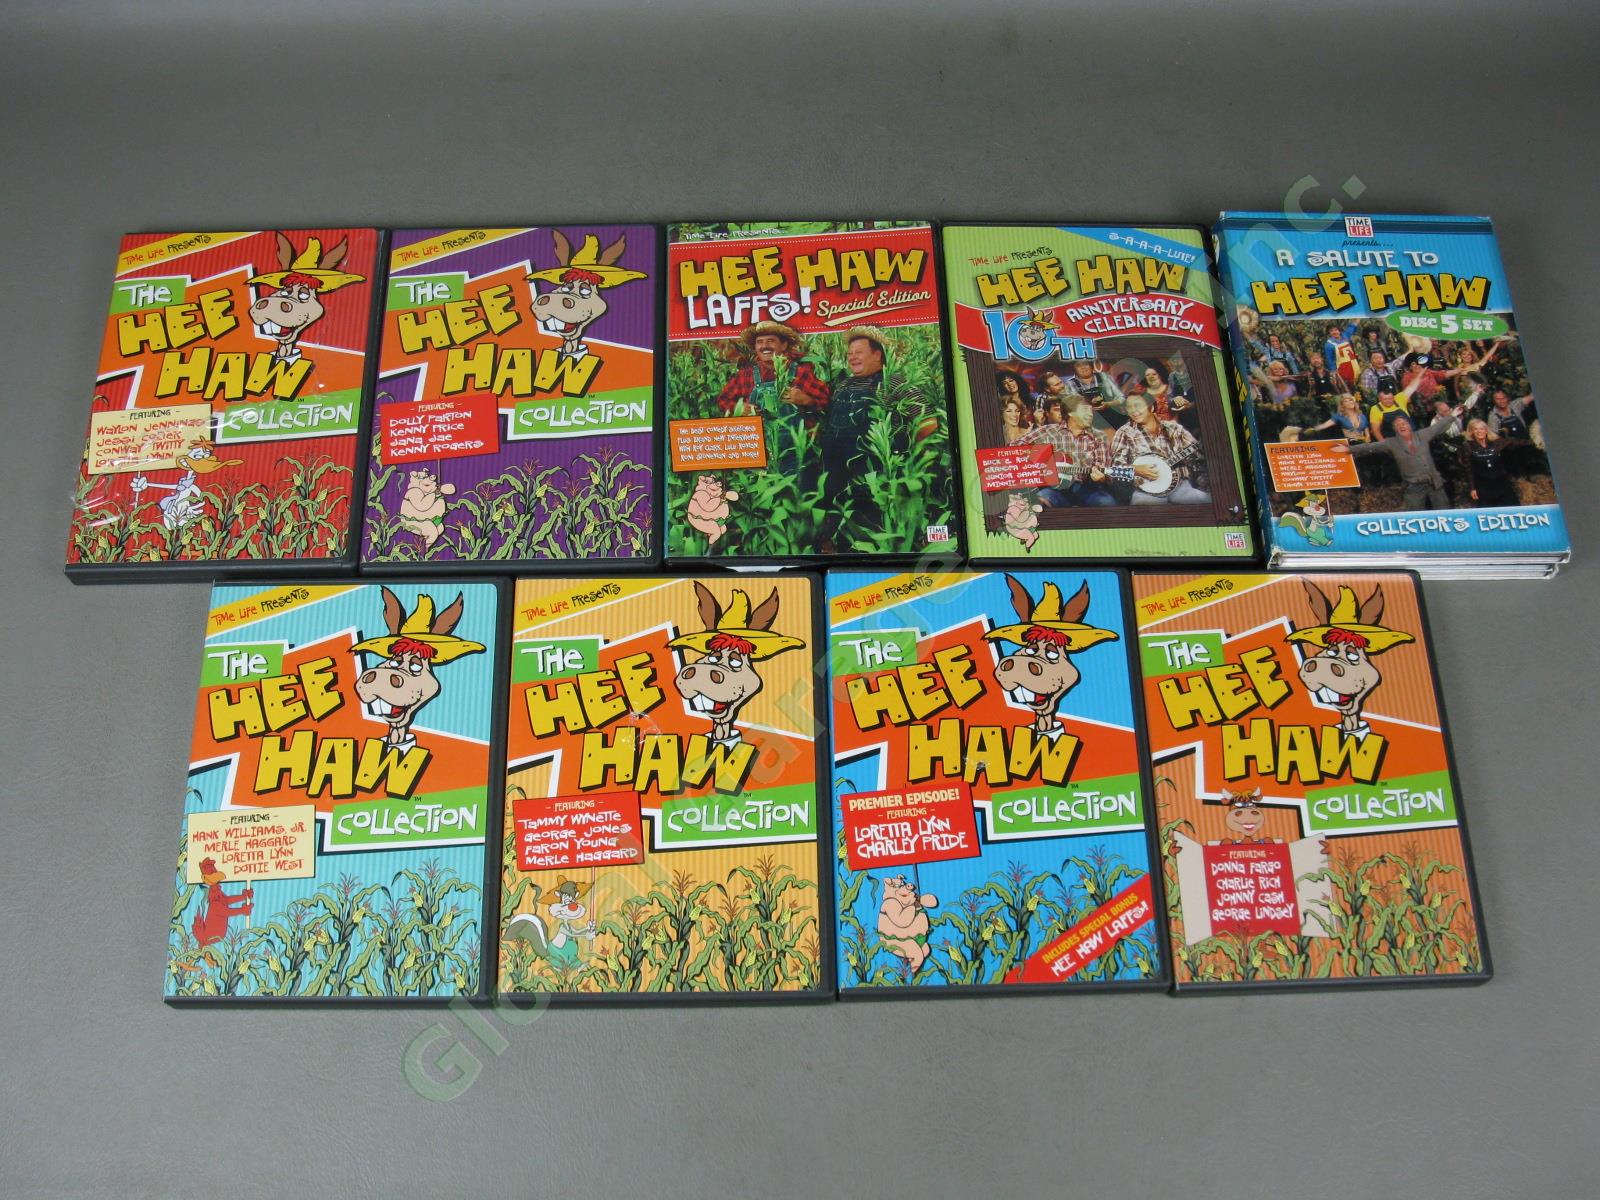 Hee Haw TV Series DVD Box Lot Collection Collectors Edition Laffs Anniversary NR 1